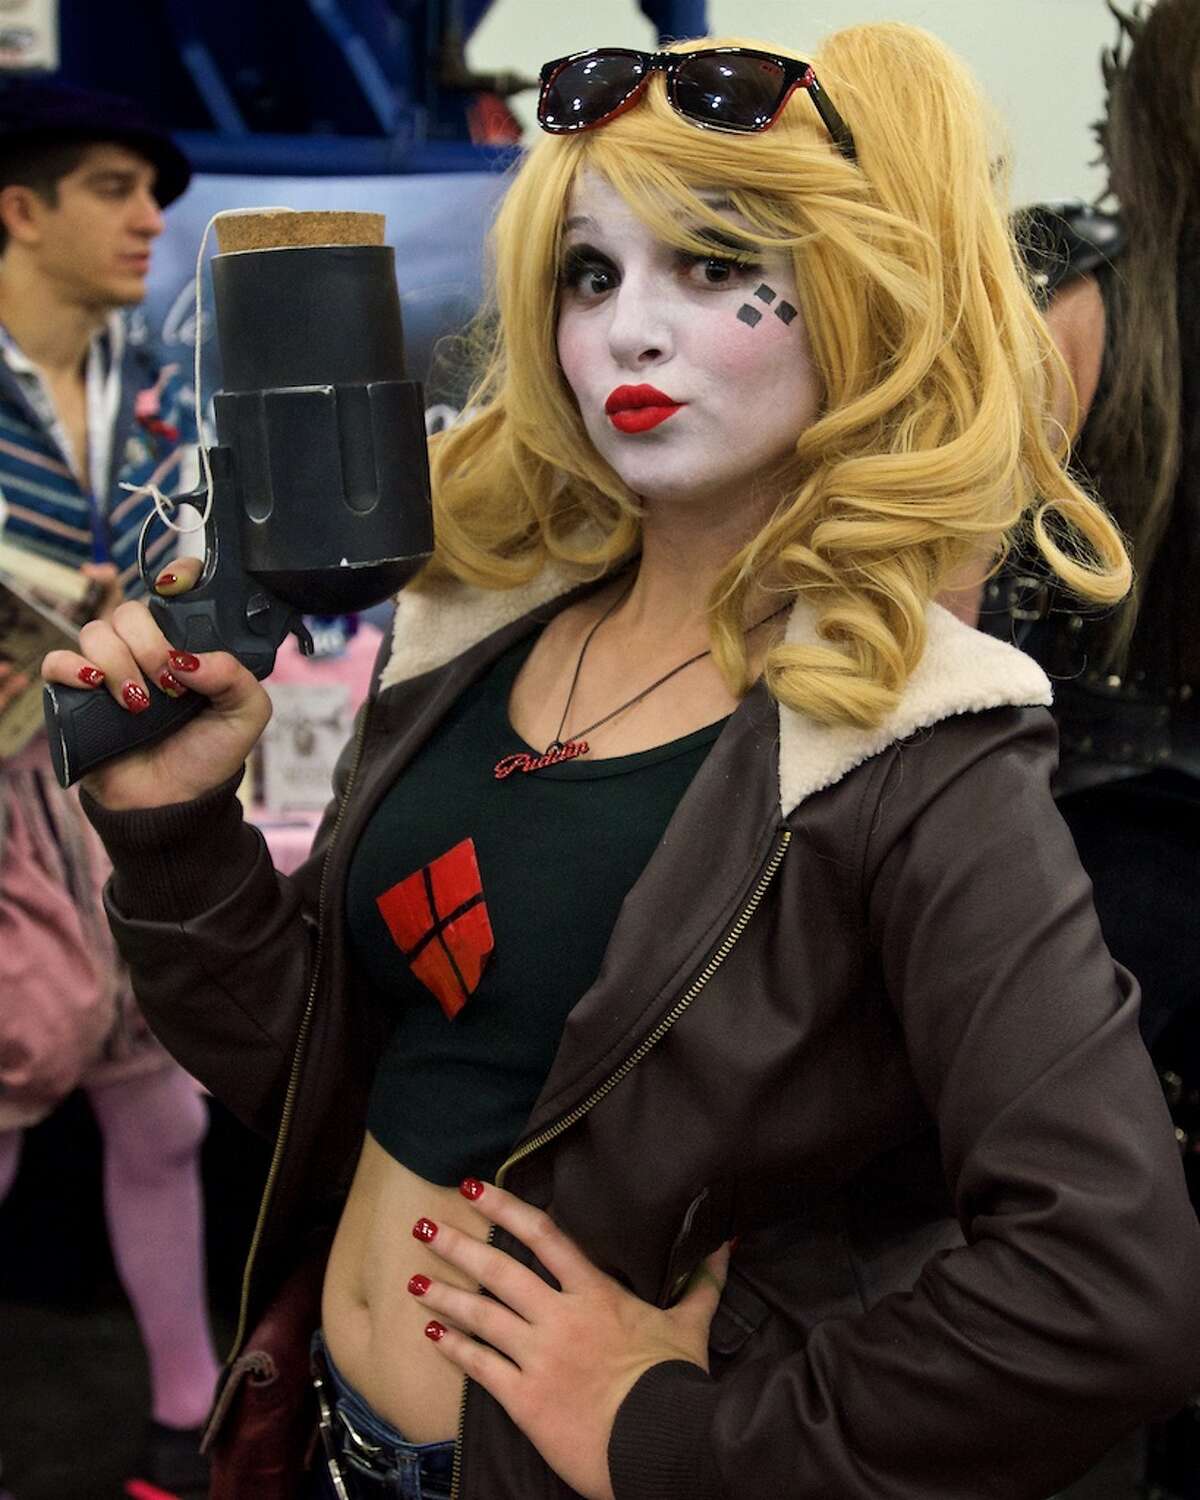 A fan dressed as Harley Quinn poses for a photo during Comicpalooza, at the George R. Brown Convention Center, Saturday, June 18, 2016, in Houston.